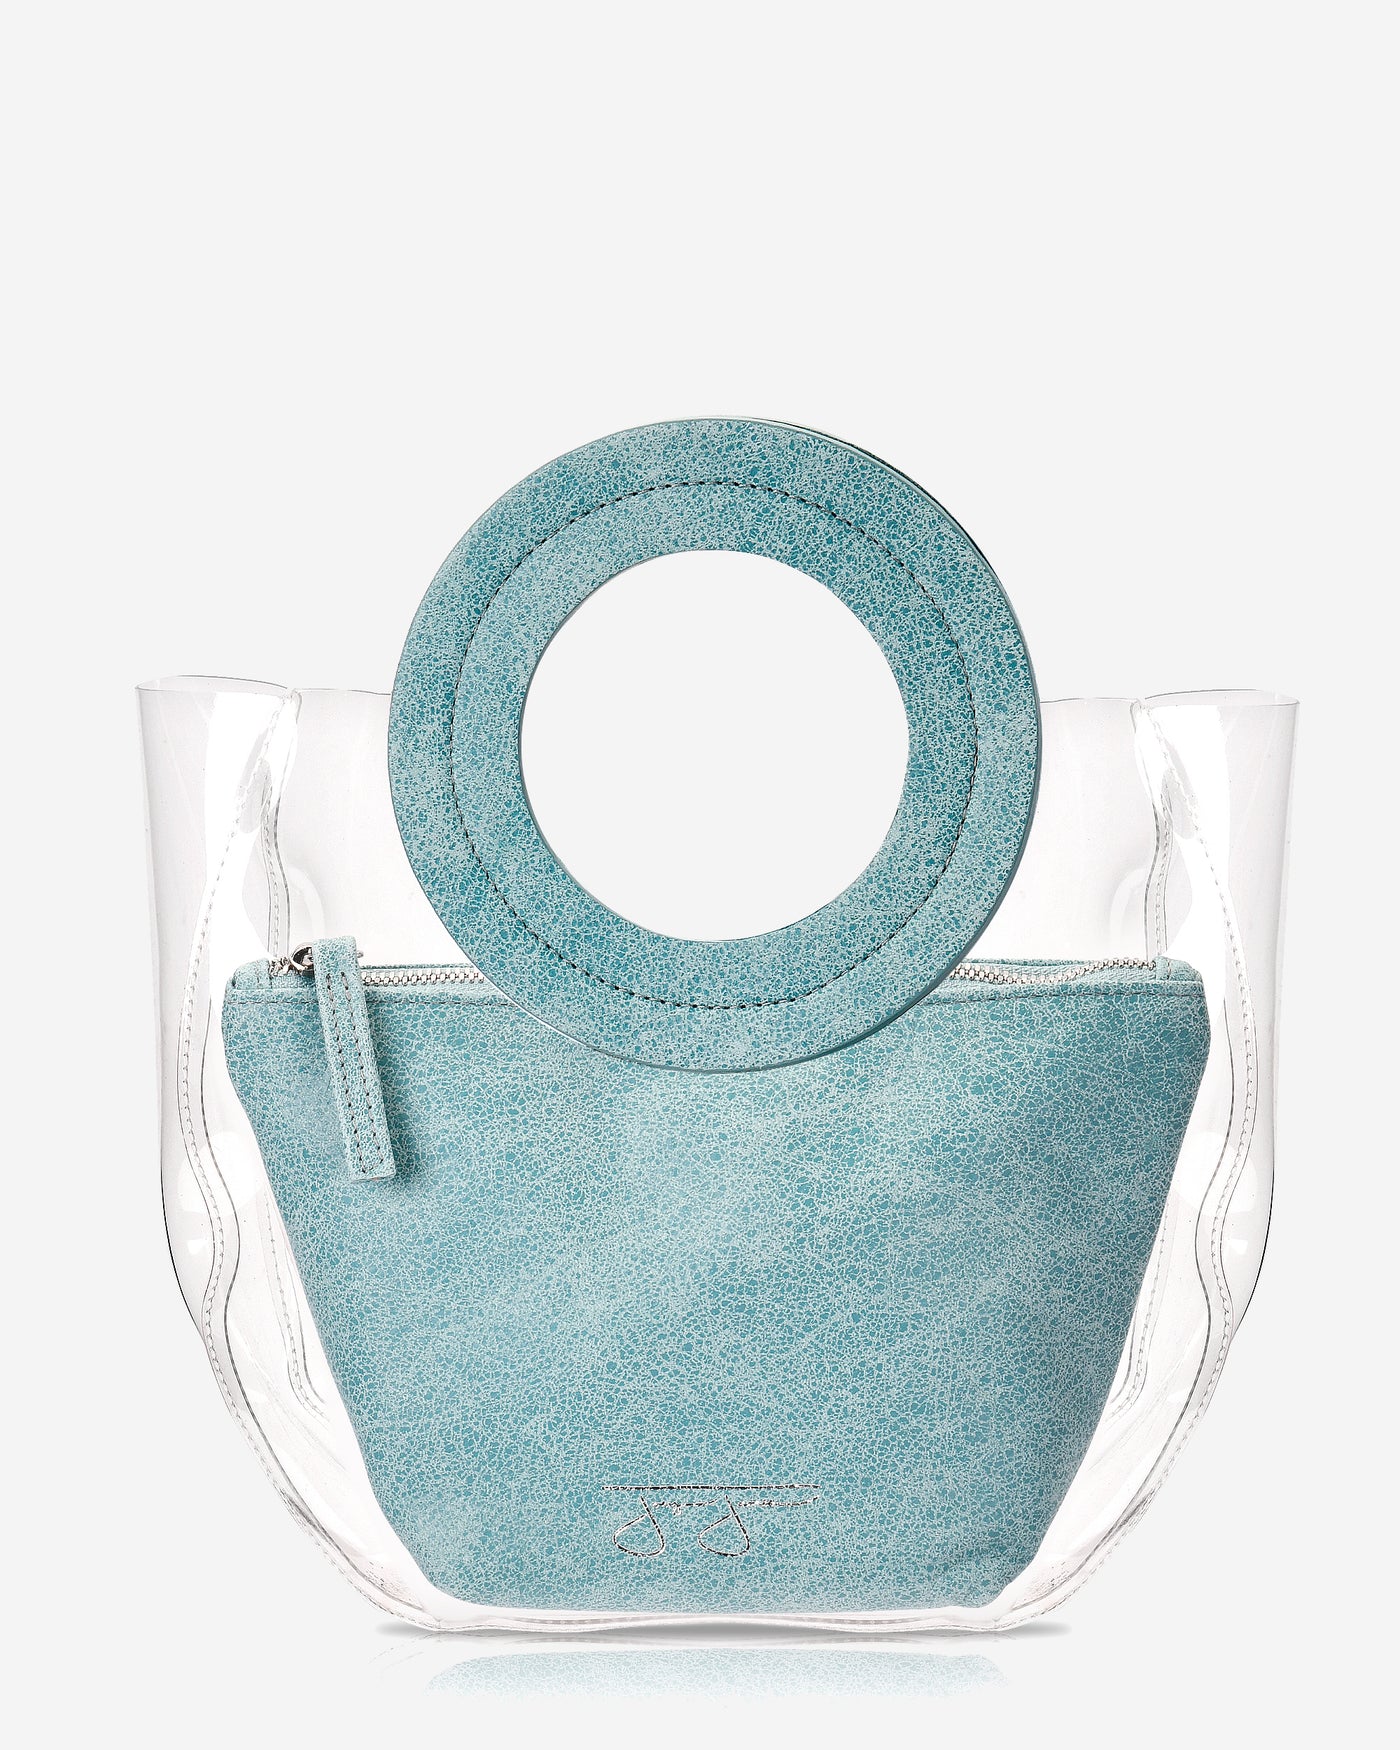 Lacey Bag - Turquoise Lacey Clear Bag Joey James, The Label   